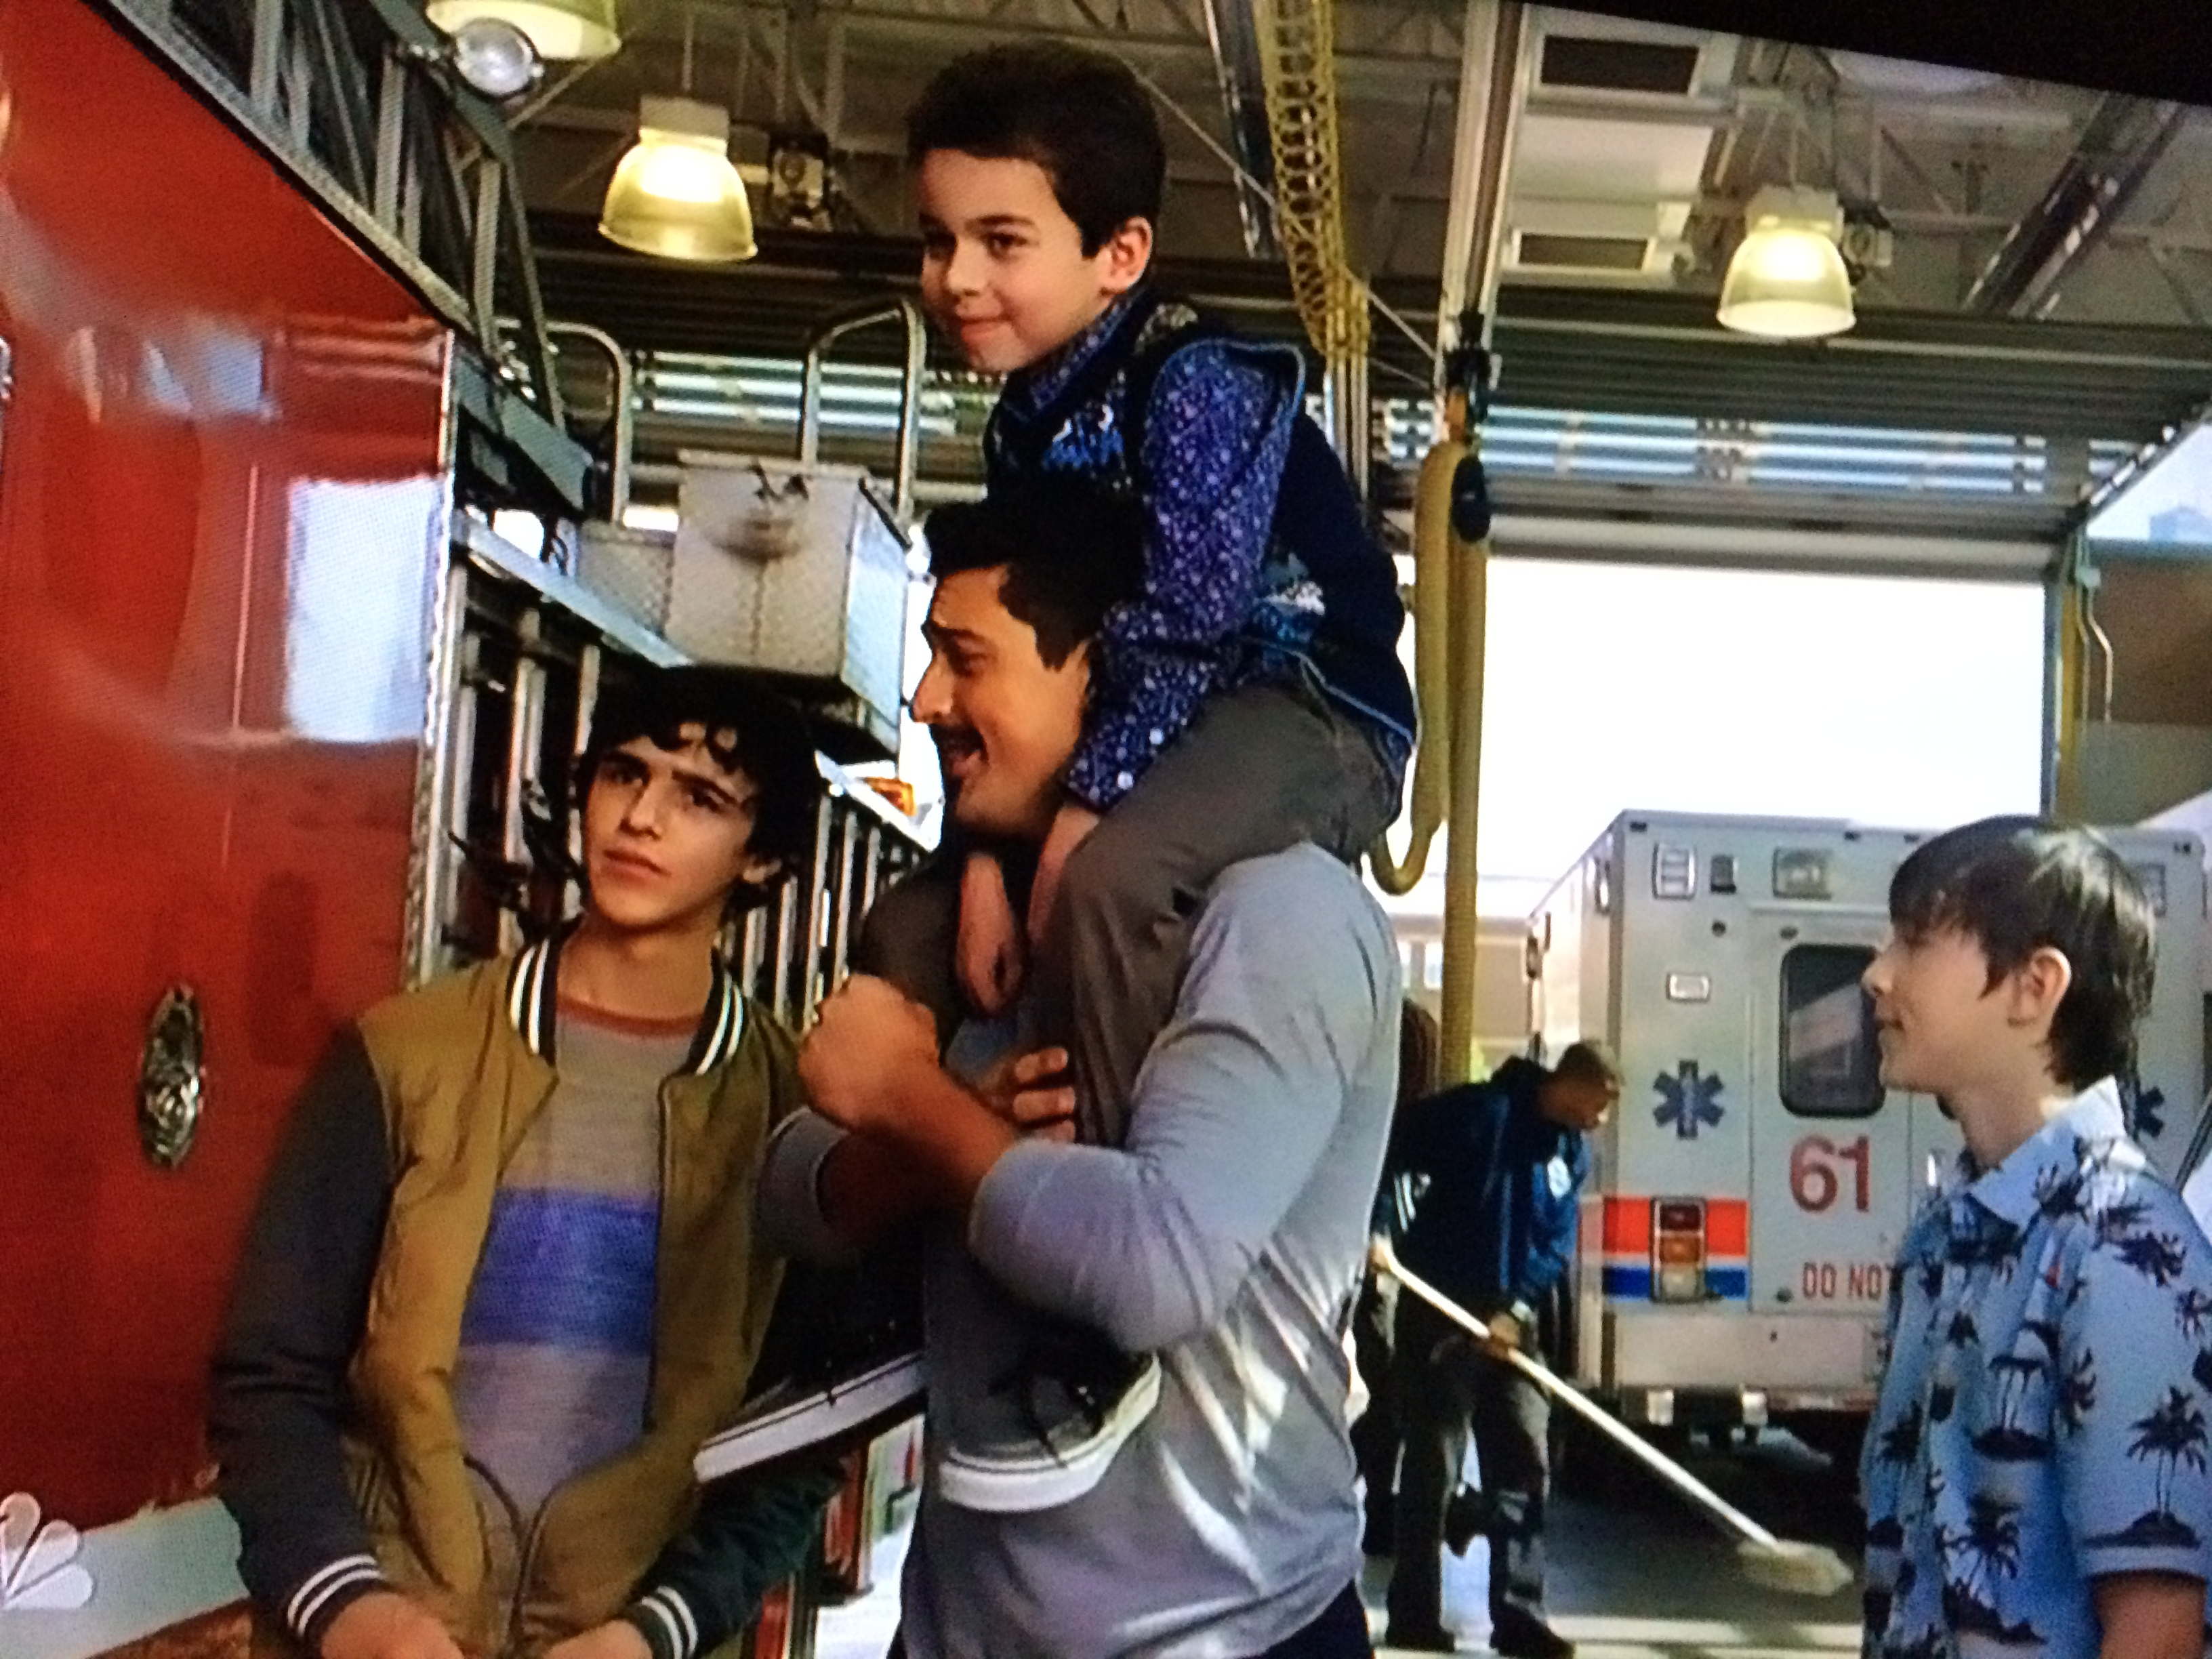 Screen capture of the awesome filming day on Chicago Fire with Yuri Sardarov (Otis). Jacob played one of the three Nephews of Otis this day. He hopes to be written in again soon.